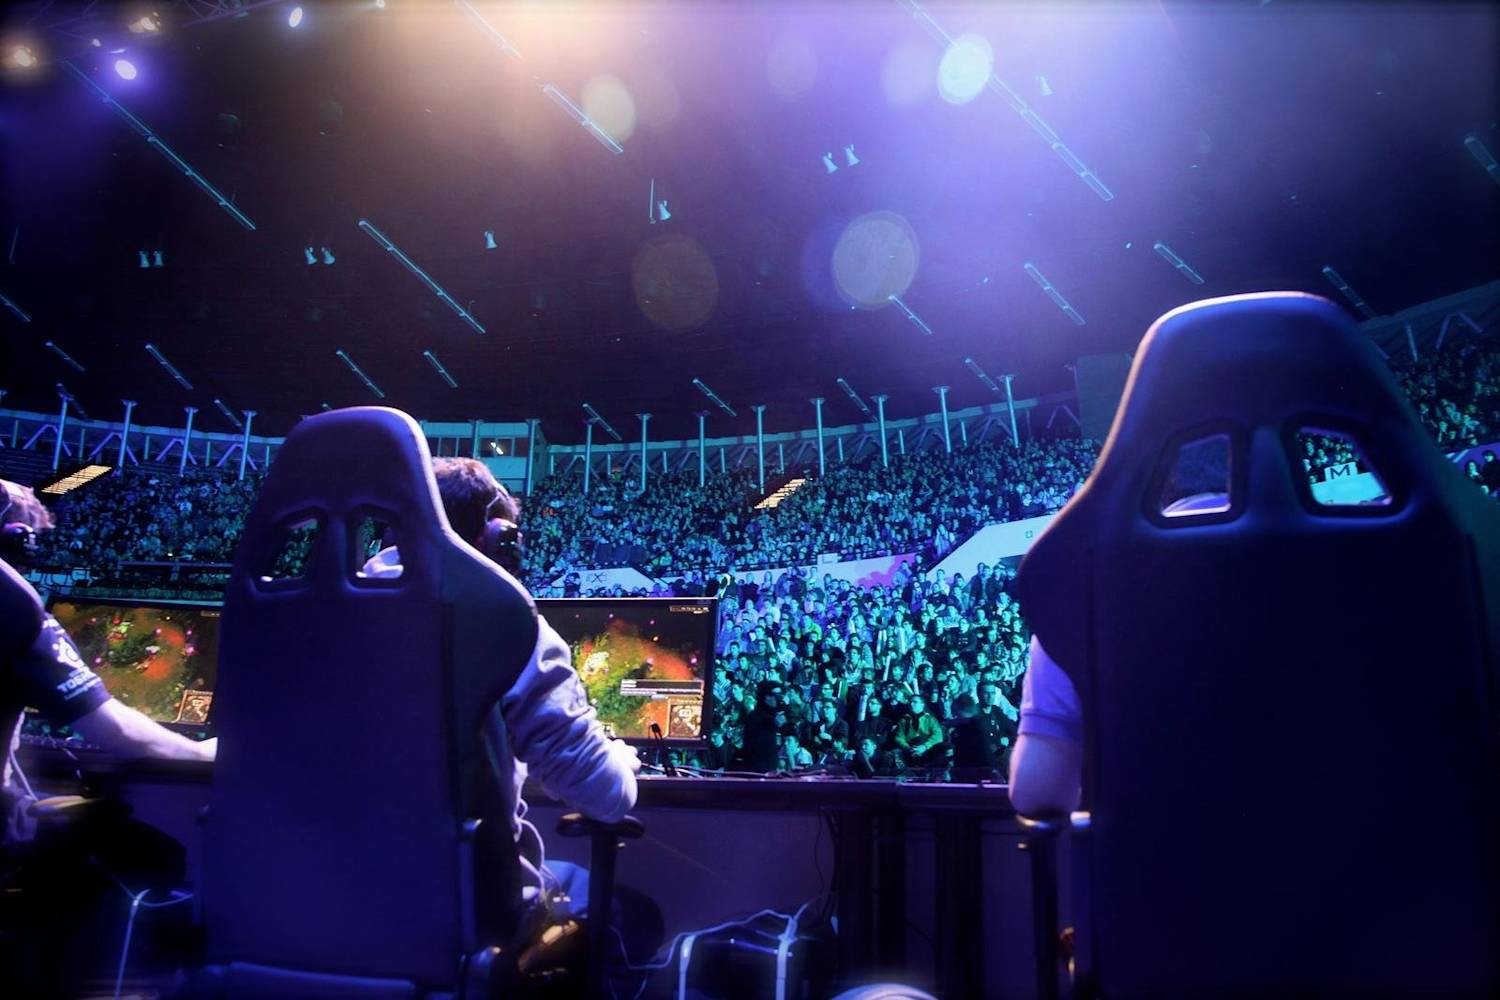 Preview Intel Extreme Masters Katowice